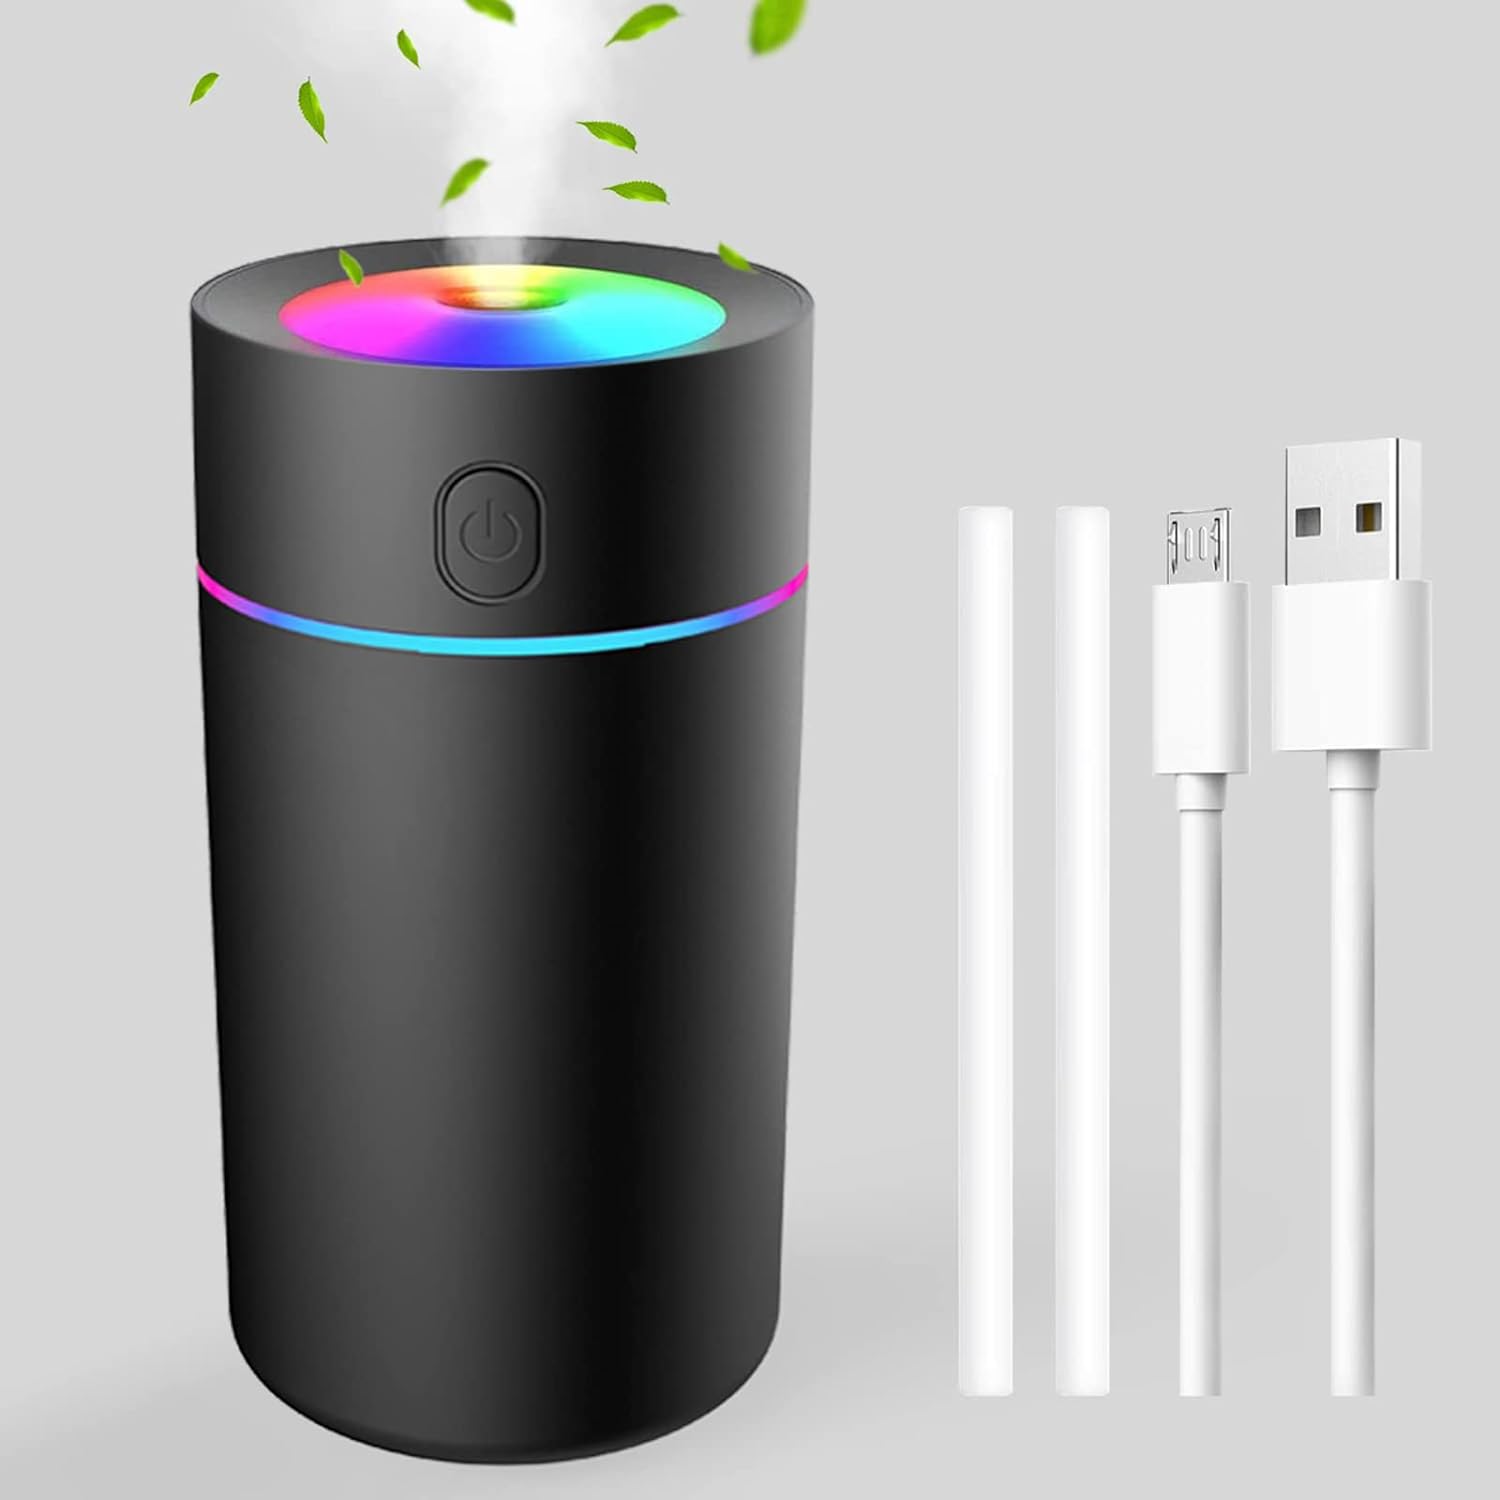 Humidifiers for Bedroom Portable Mini Humidifier with 7-color Lights, Auto Shut-Off Small Desk Humidifier [2 Mist Modes] Super Quiet USB Personal Humidifier for Bedroom, Car, Office, Travel, Plants